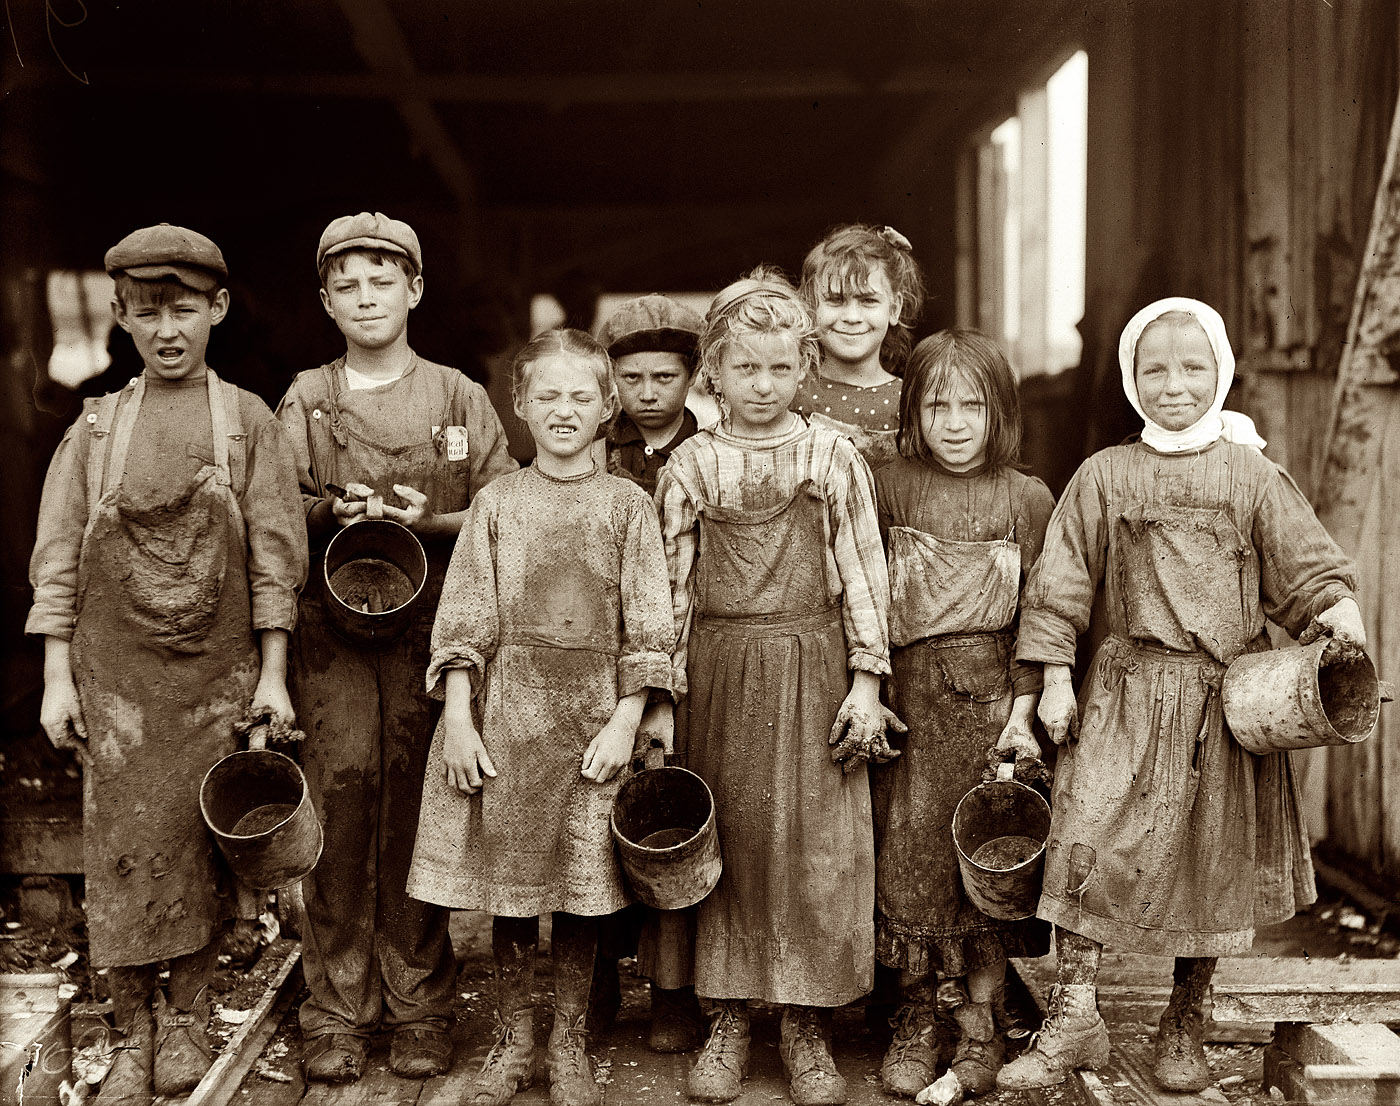 February 1912. Port Royal, South Carolina. "Nine [?] of these children from 8 yrs. old up go to school half a day, and shuck oysters for four hours before school and three hours after on school days, and on Saturday from 4 a.m. to early afternoon. Maggioni Canning Co." View full size. Photo and caption by Lewis Wickes Hine.